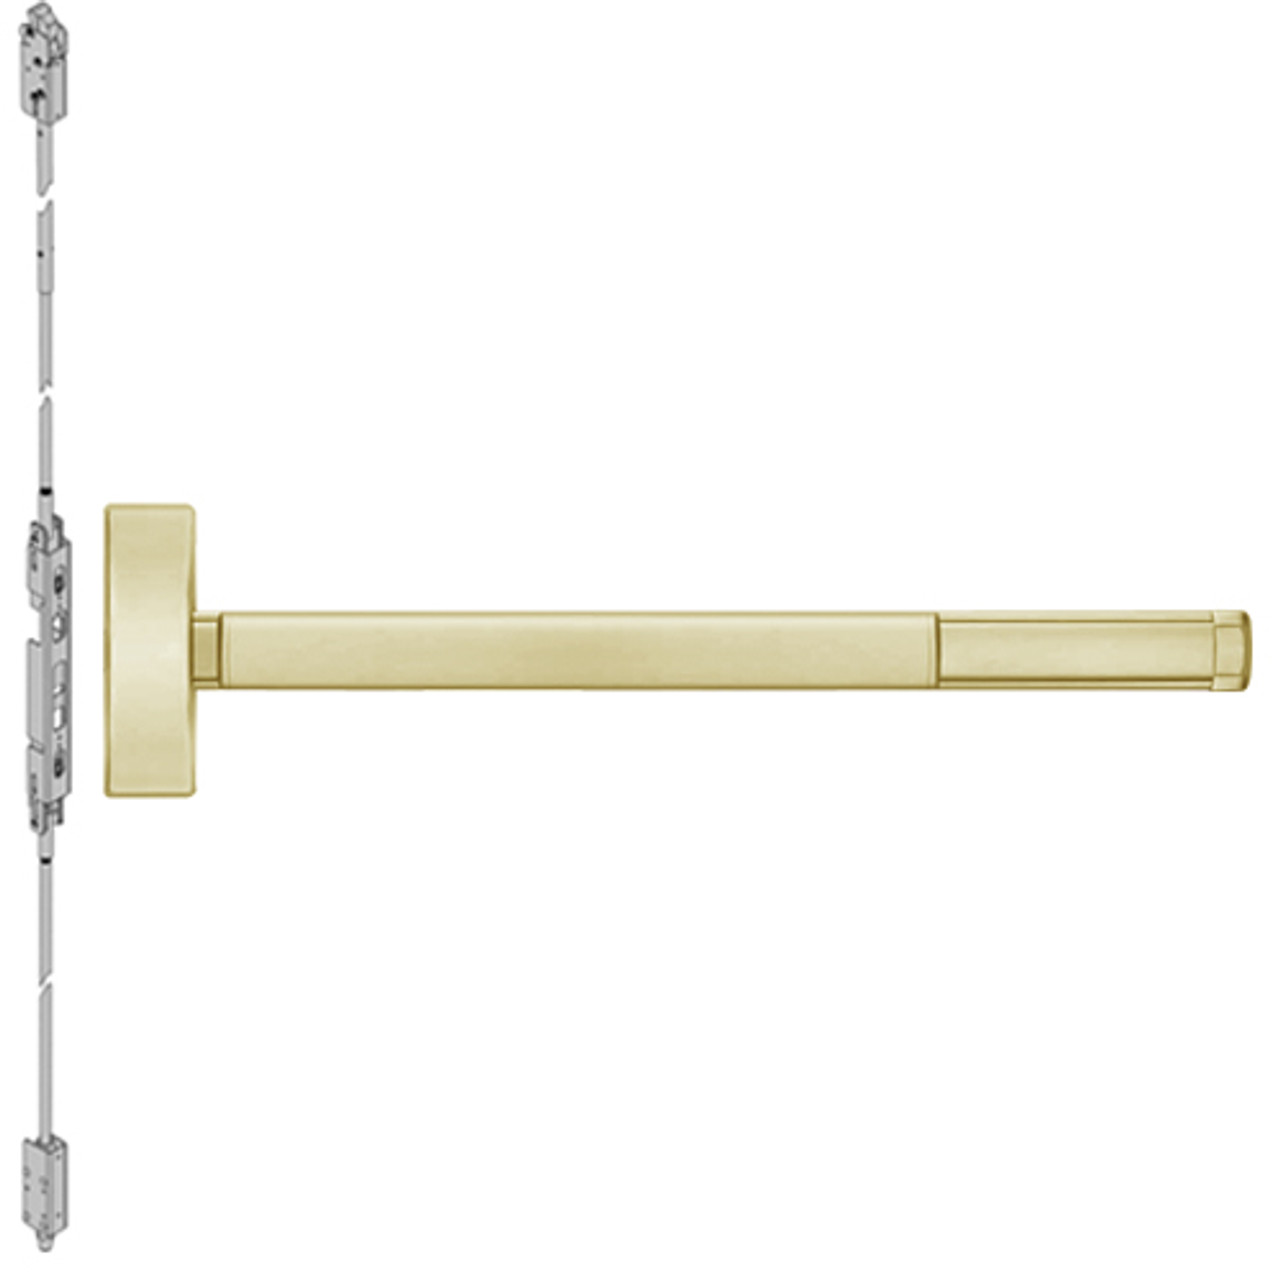 TS2808-606-36 PHI 2800 Series Concealed Vertical Rod Exit Device with Touchbar Monitoring Switch Prepped for Key Controls Lever-Knob in Satin Brass Finish